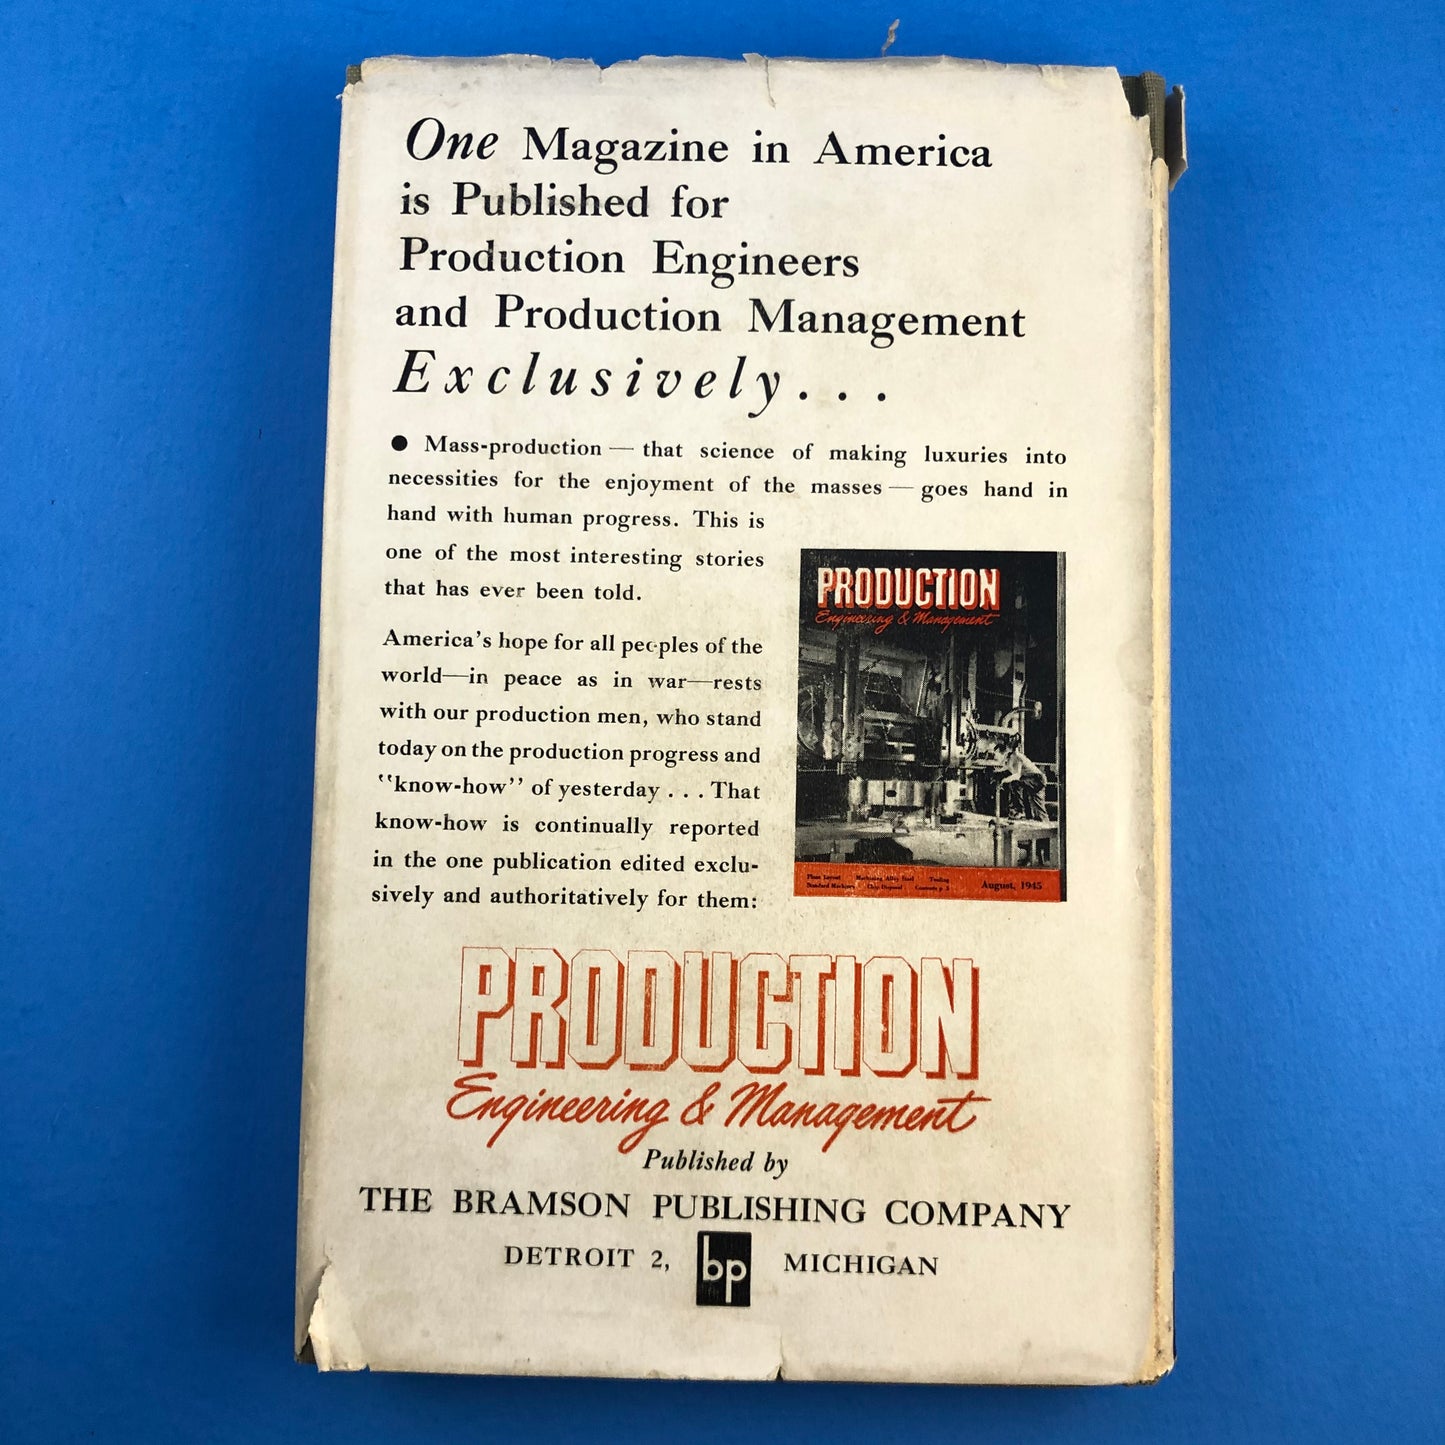 Highlights in the History of American Mass Production